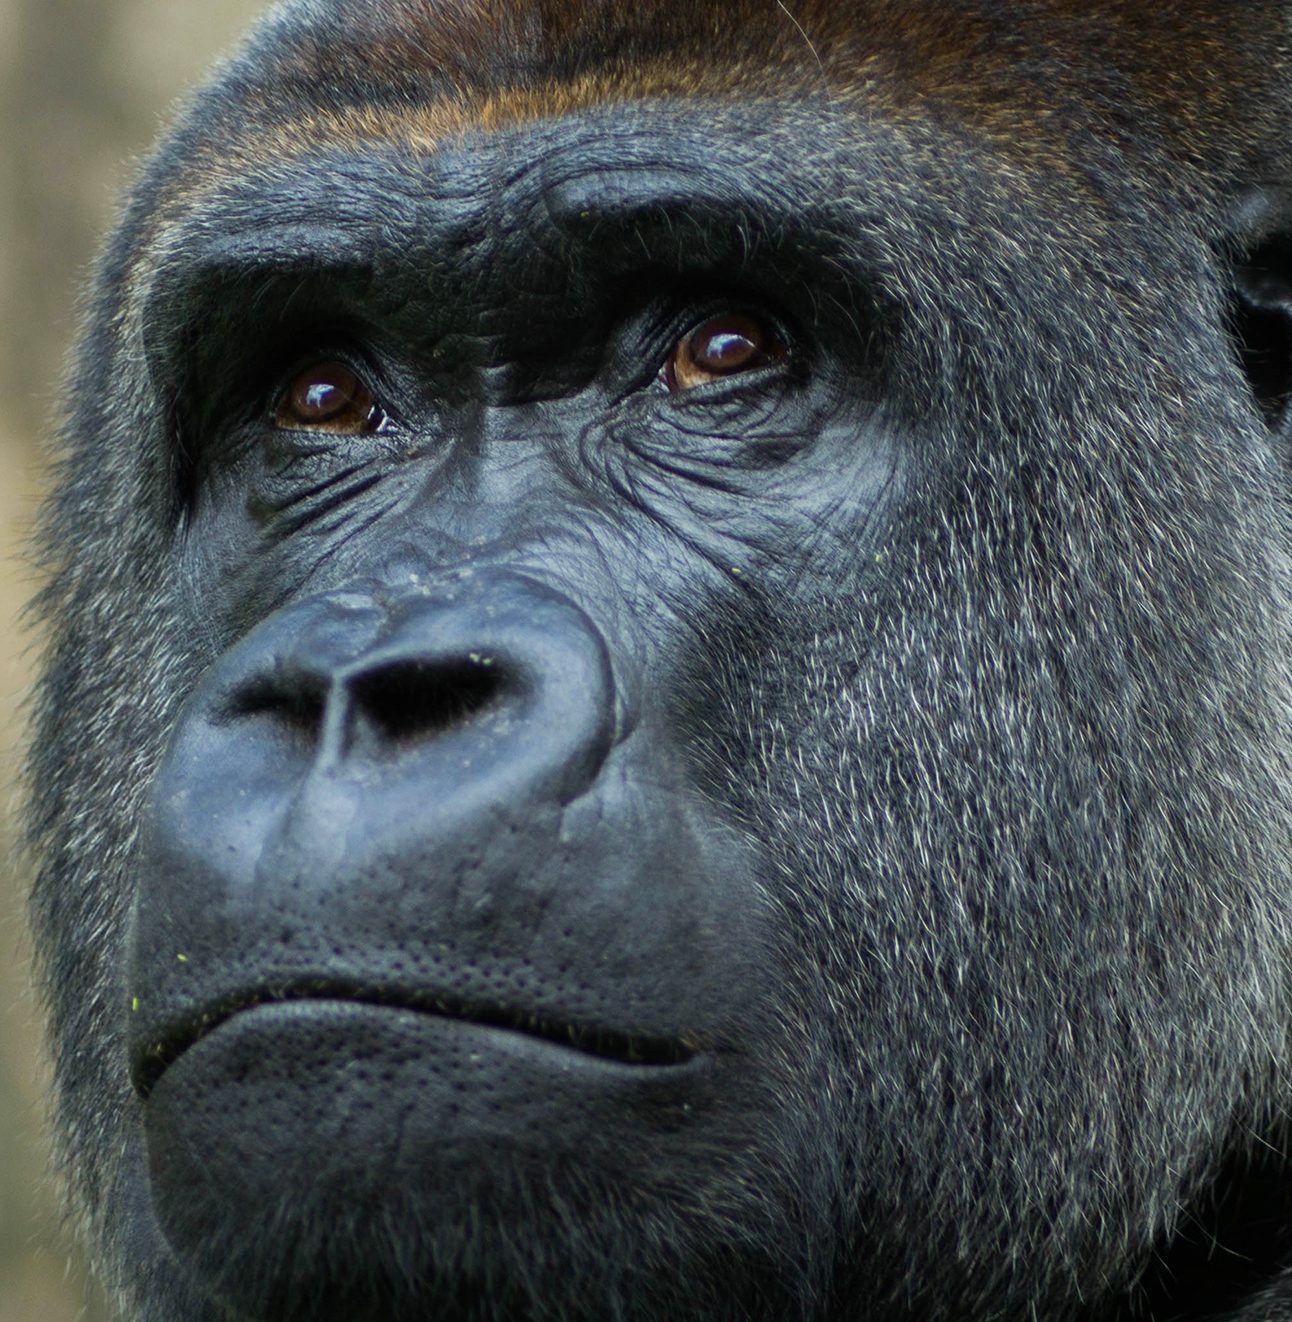 Close up of the face of a gorilla